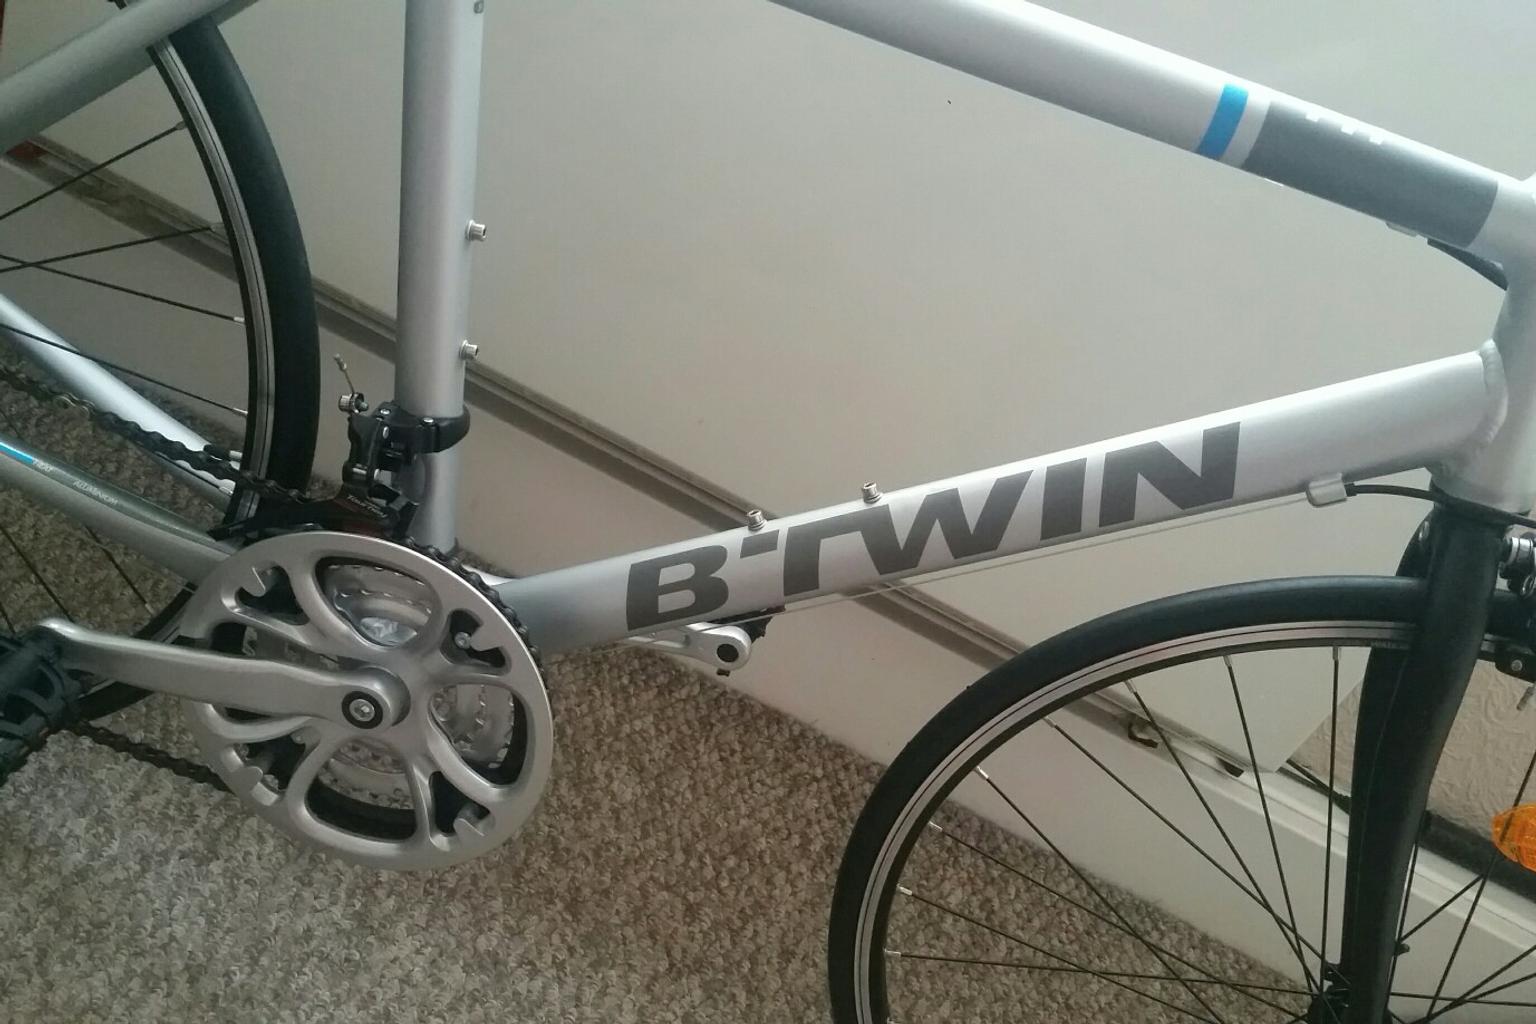 btwin fit 300